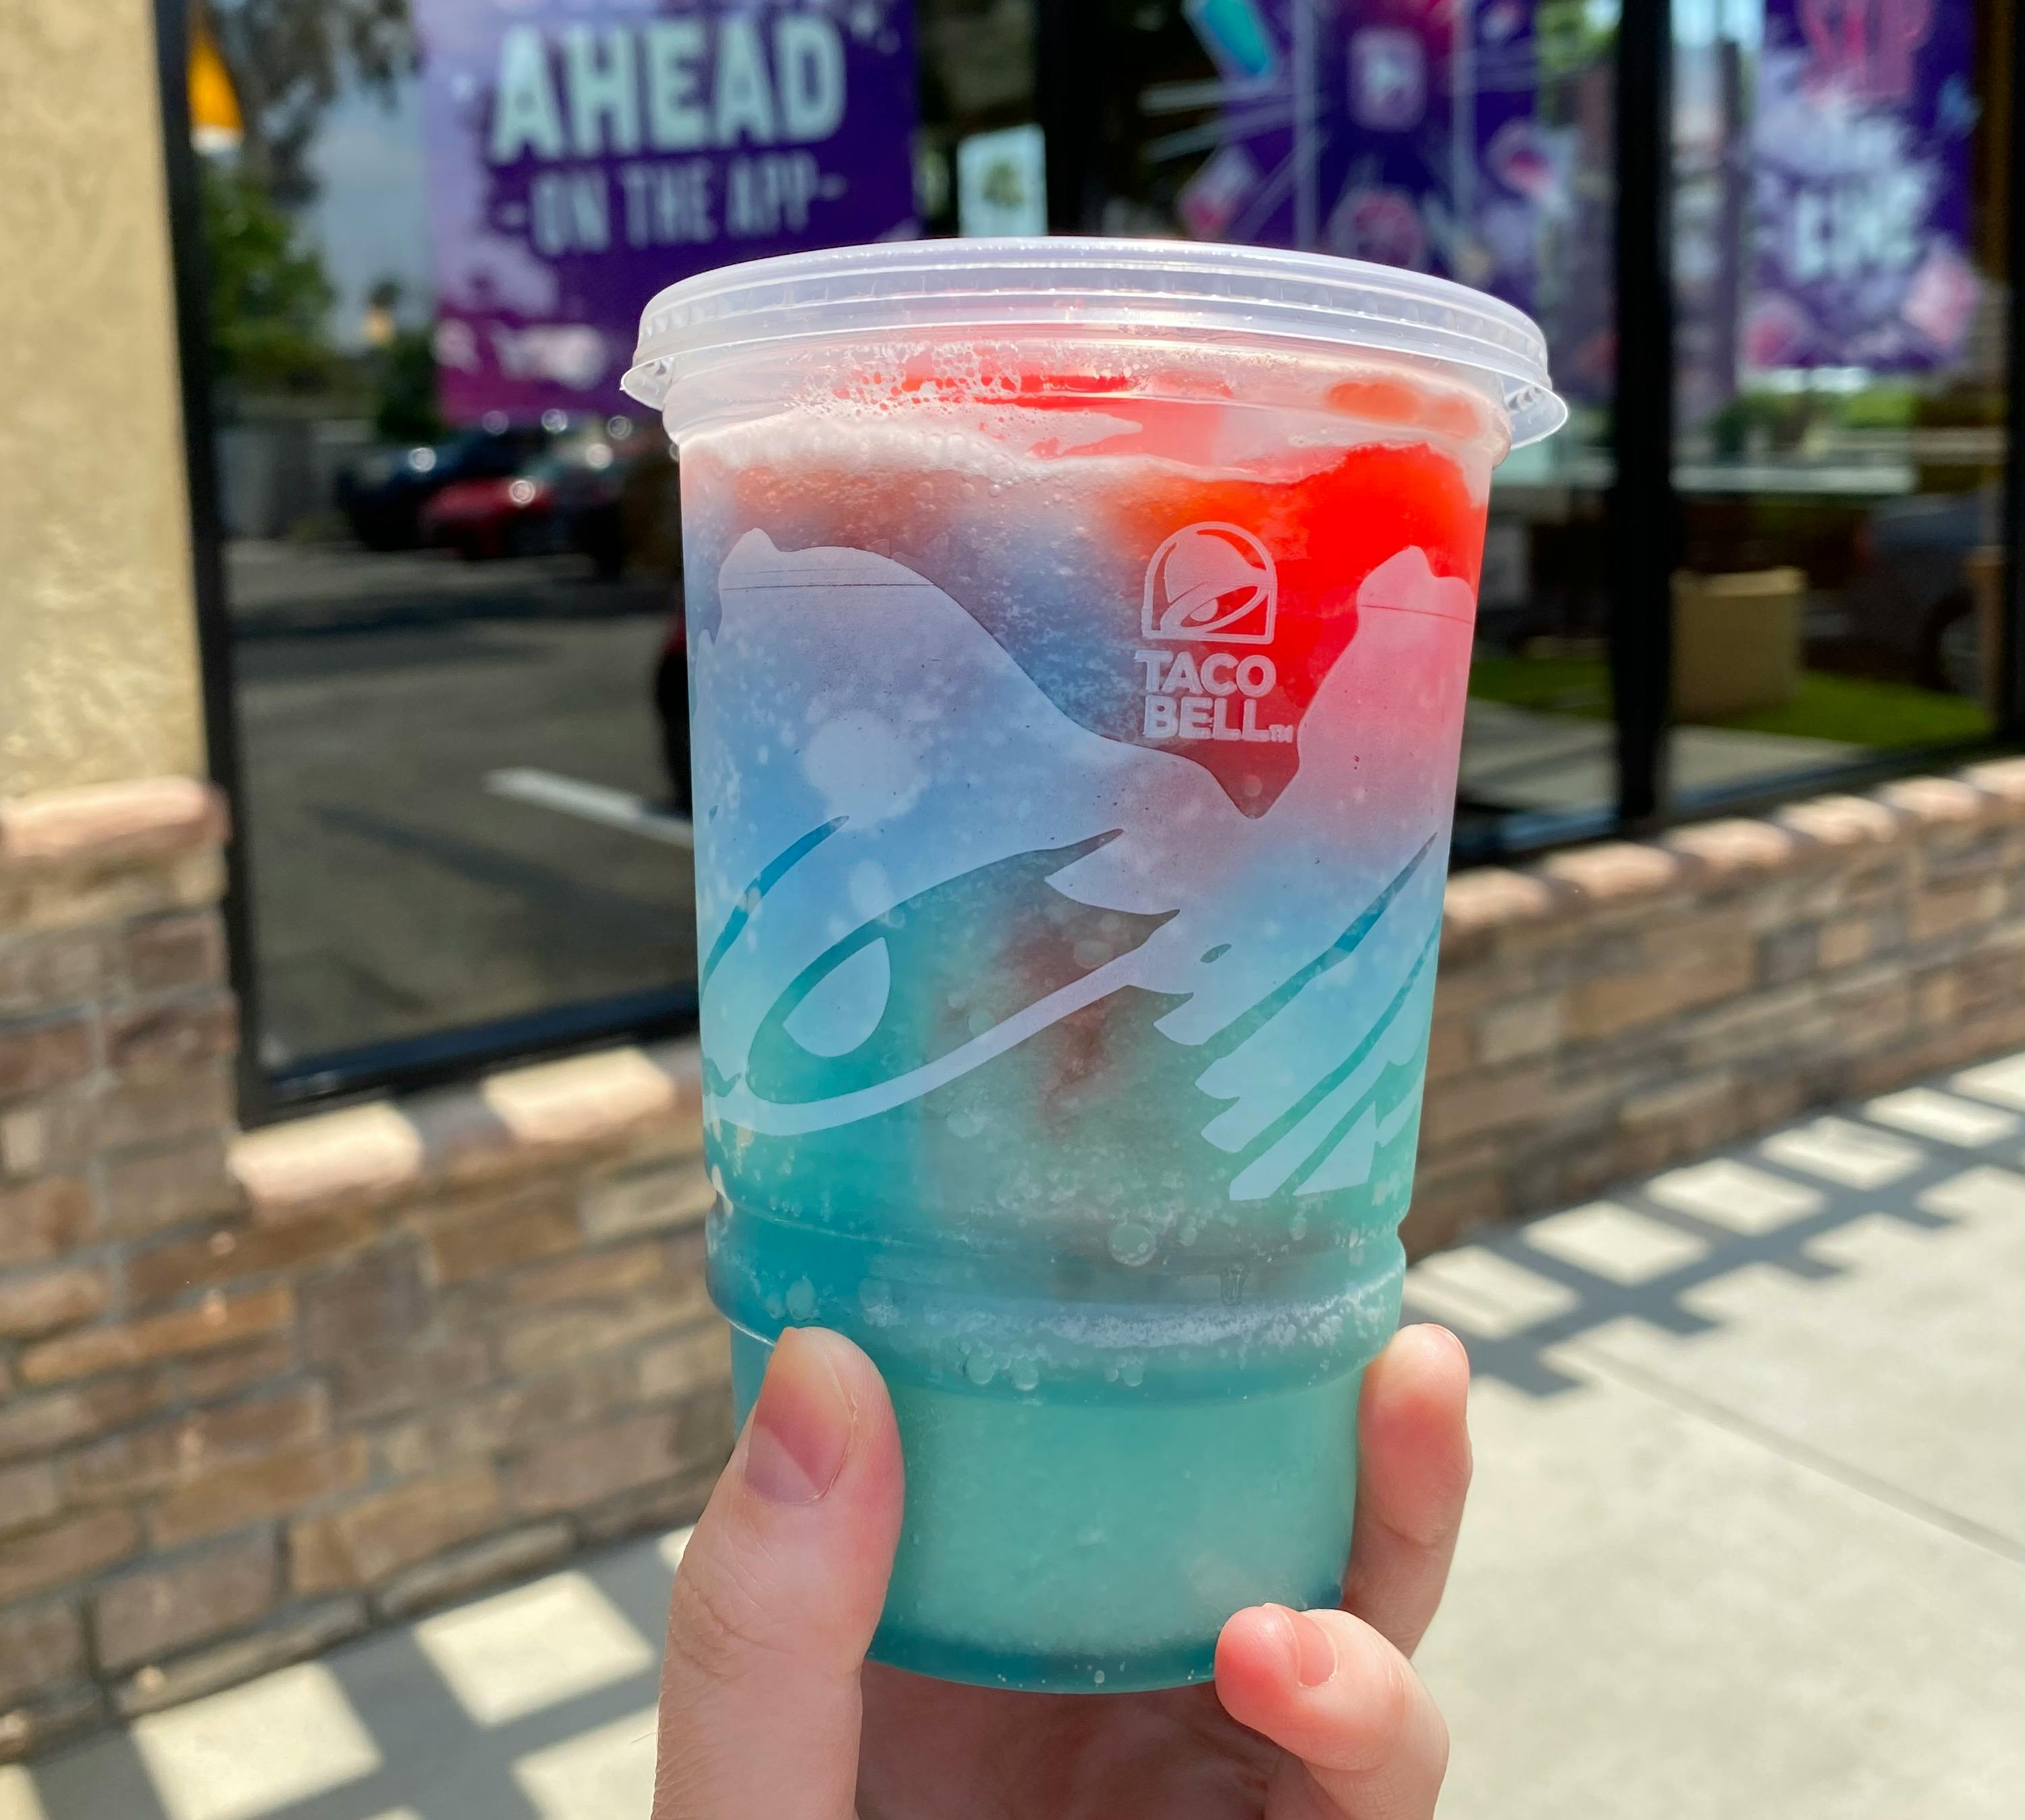 A person's hand holding a small Taco Bell slushie with layered flavors outside a Taco Bell restaurant.